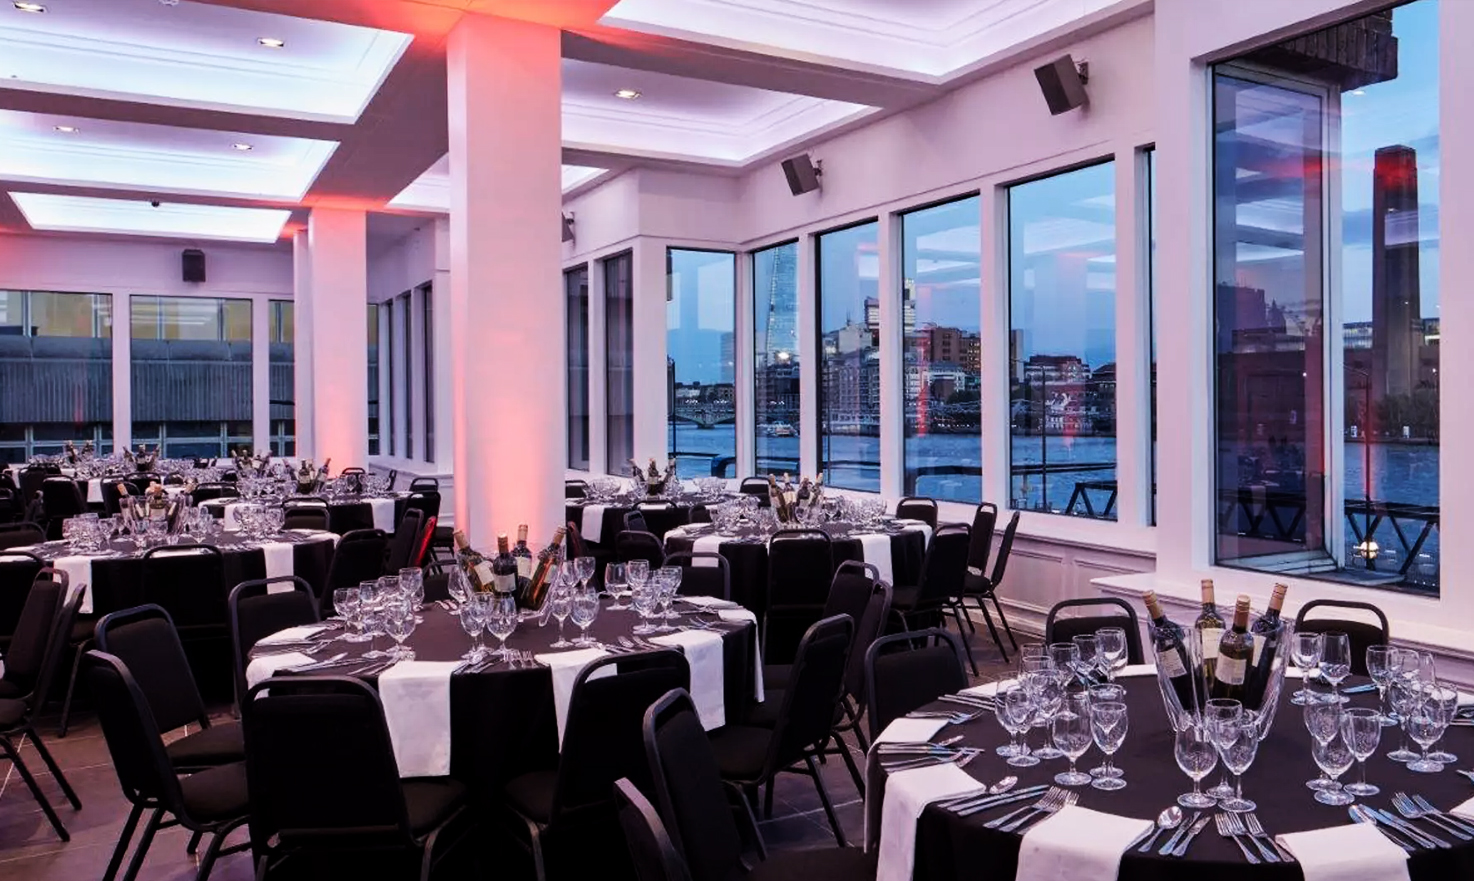 Right Angle Corporate Events Venues - The Mermaid